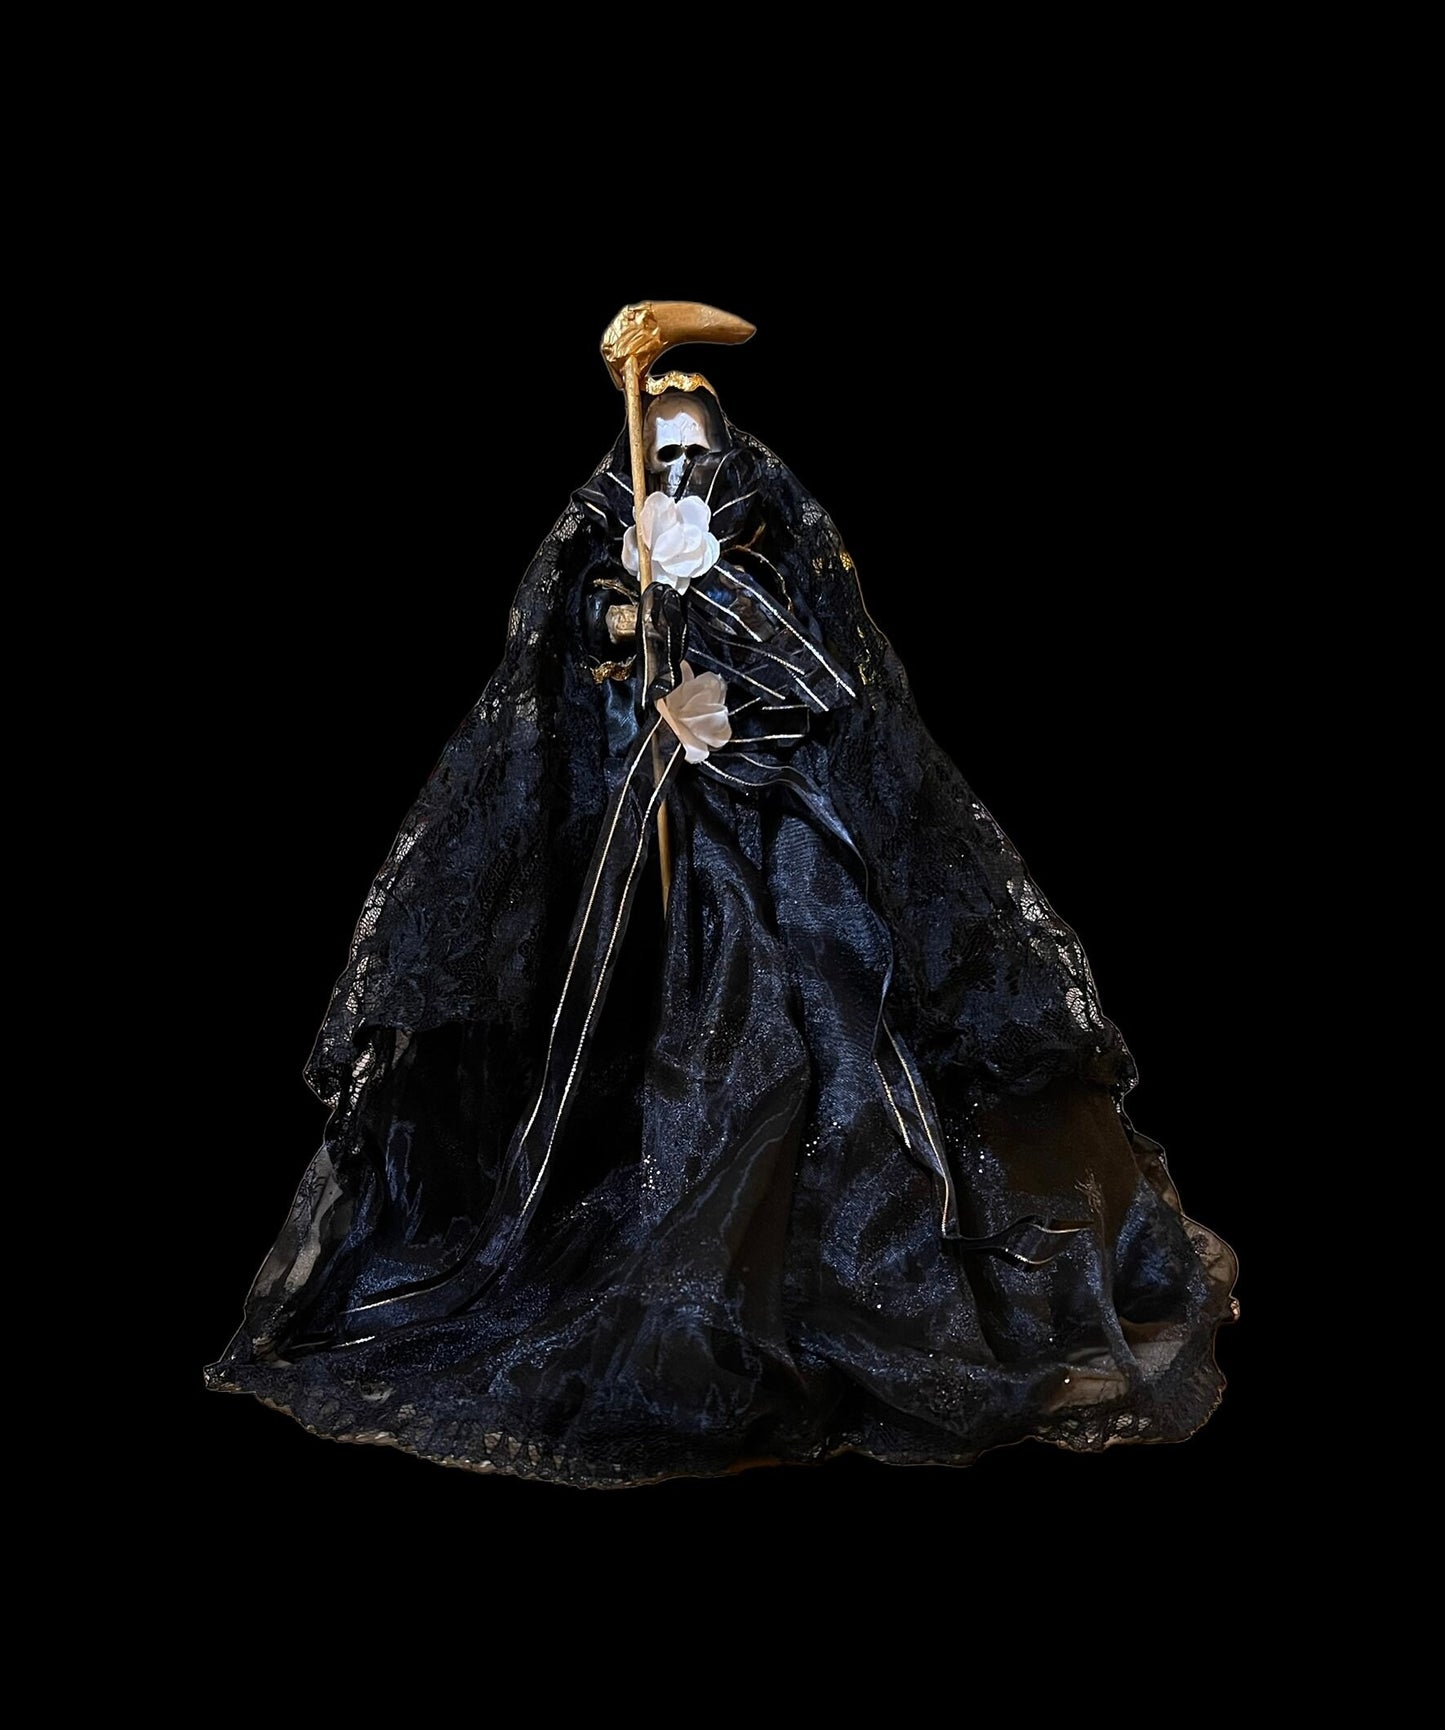 12” Santa Muerte Negra Statue with Dress + Baptized + Fixed + Made in Mexico + 24K Gold Leaf on Scythe